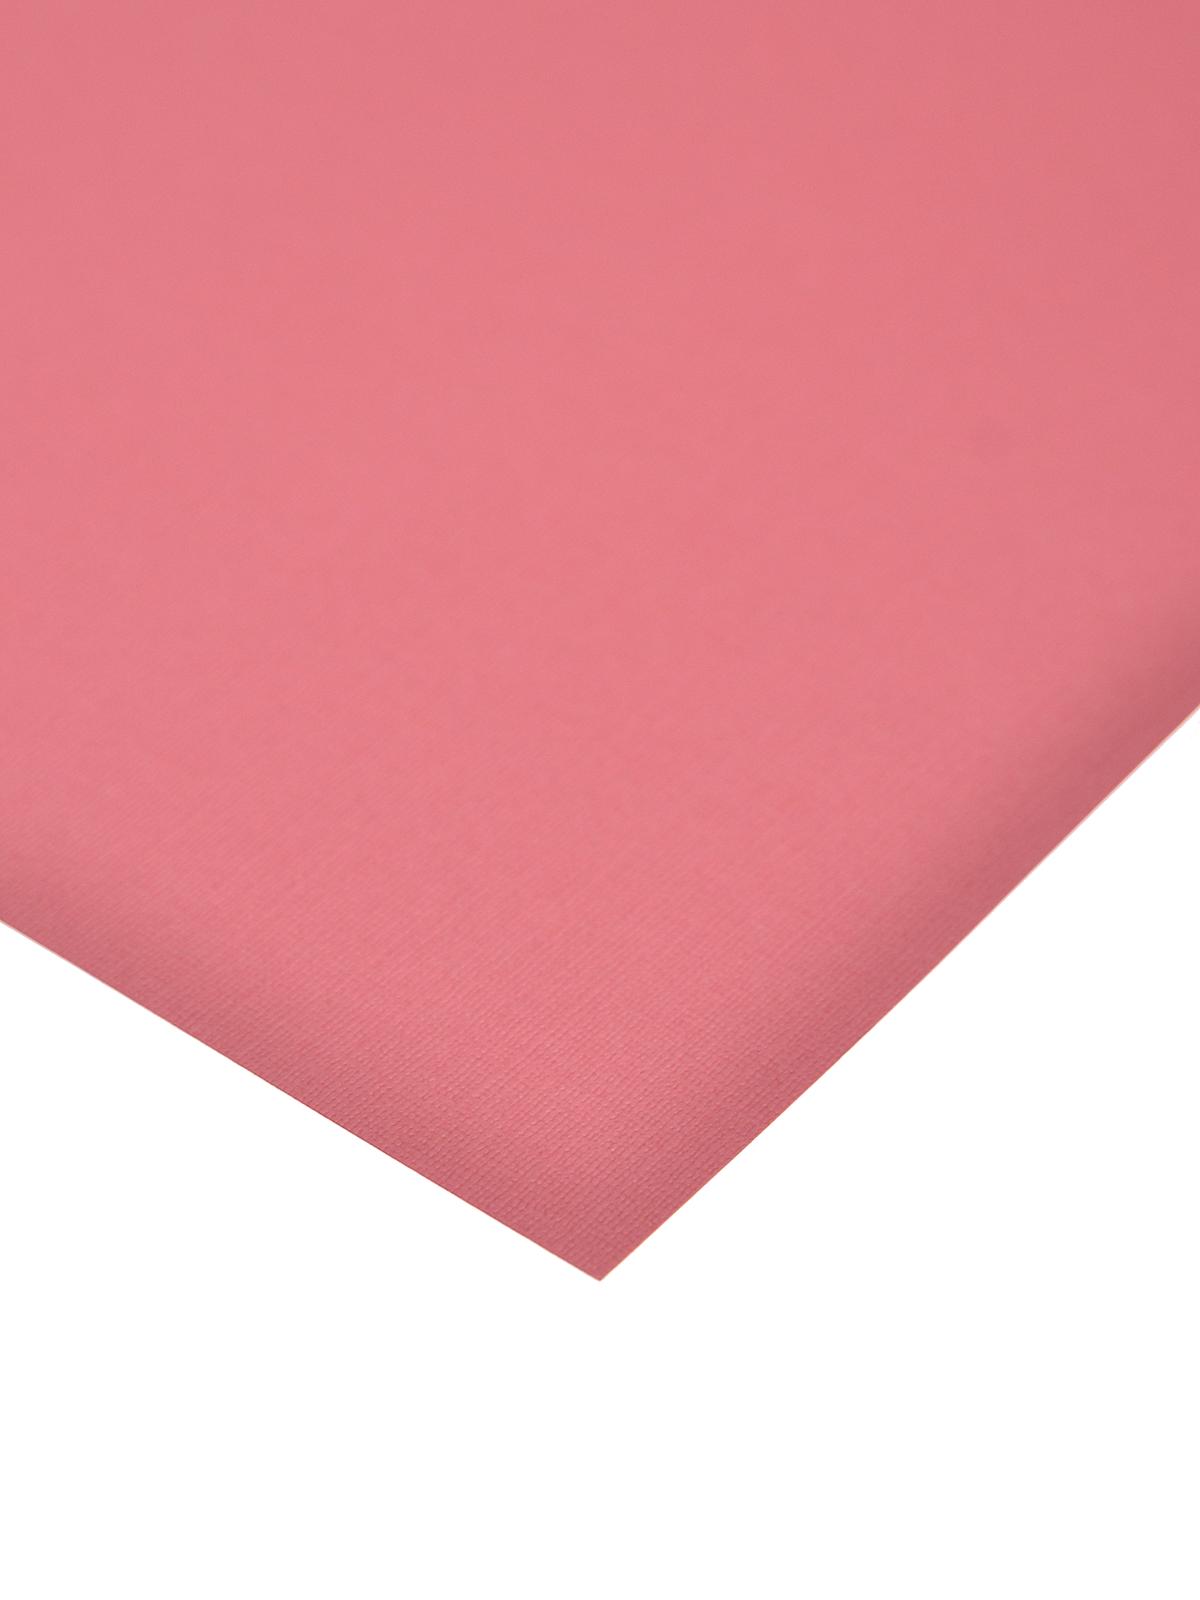 80 Lb. Canvas 8.5 In. X 11 In. Sheet Loveable